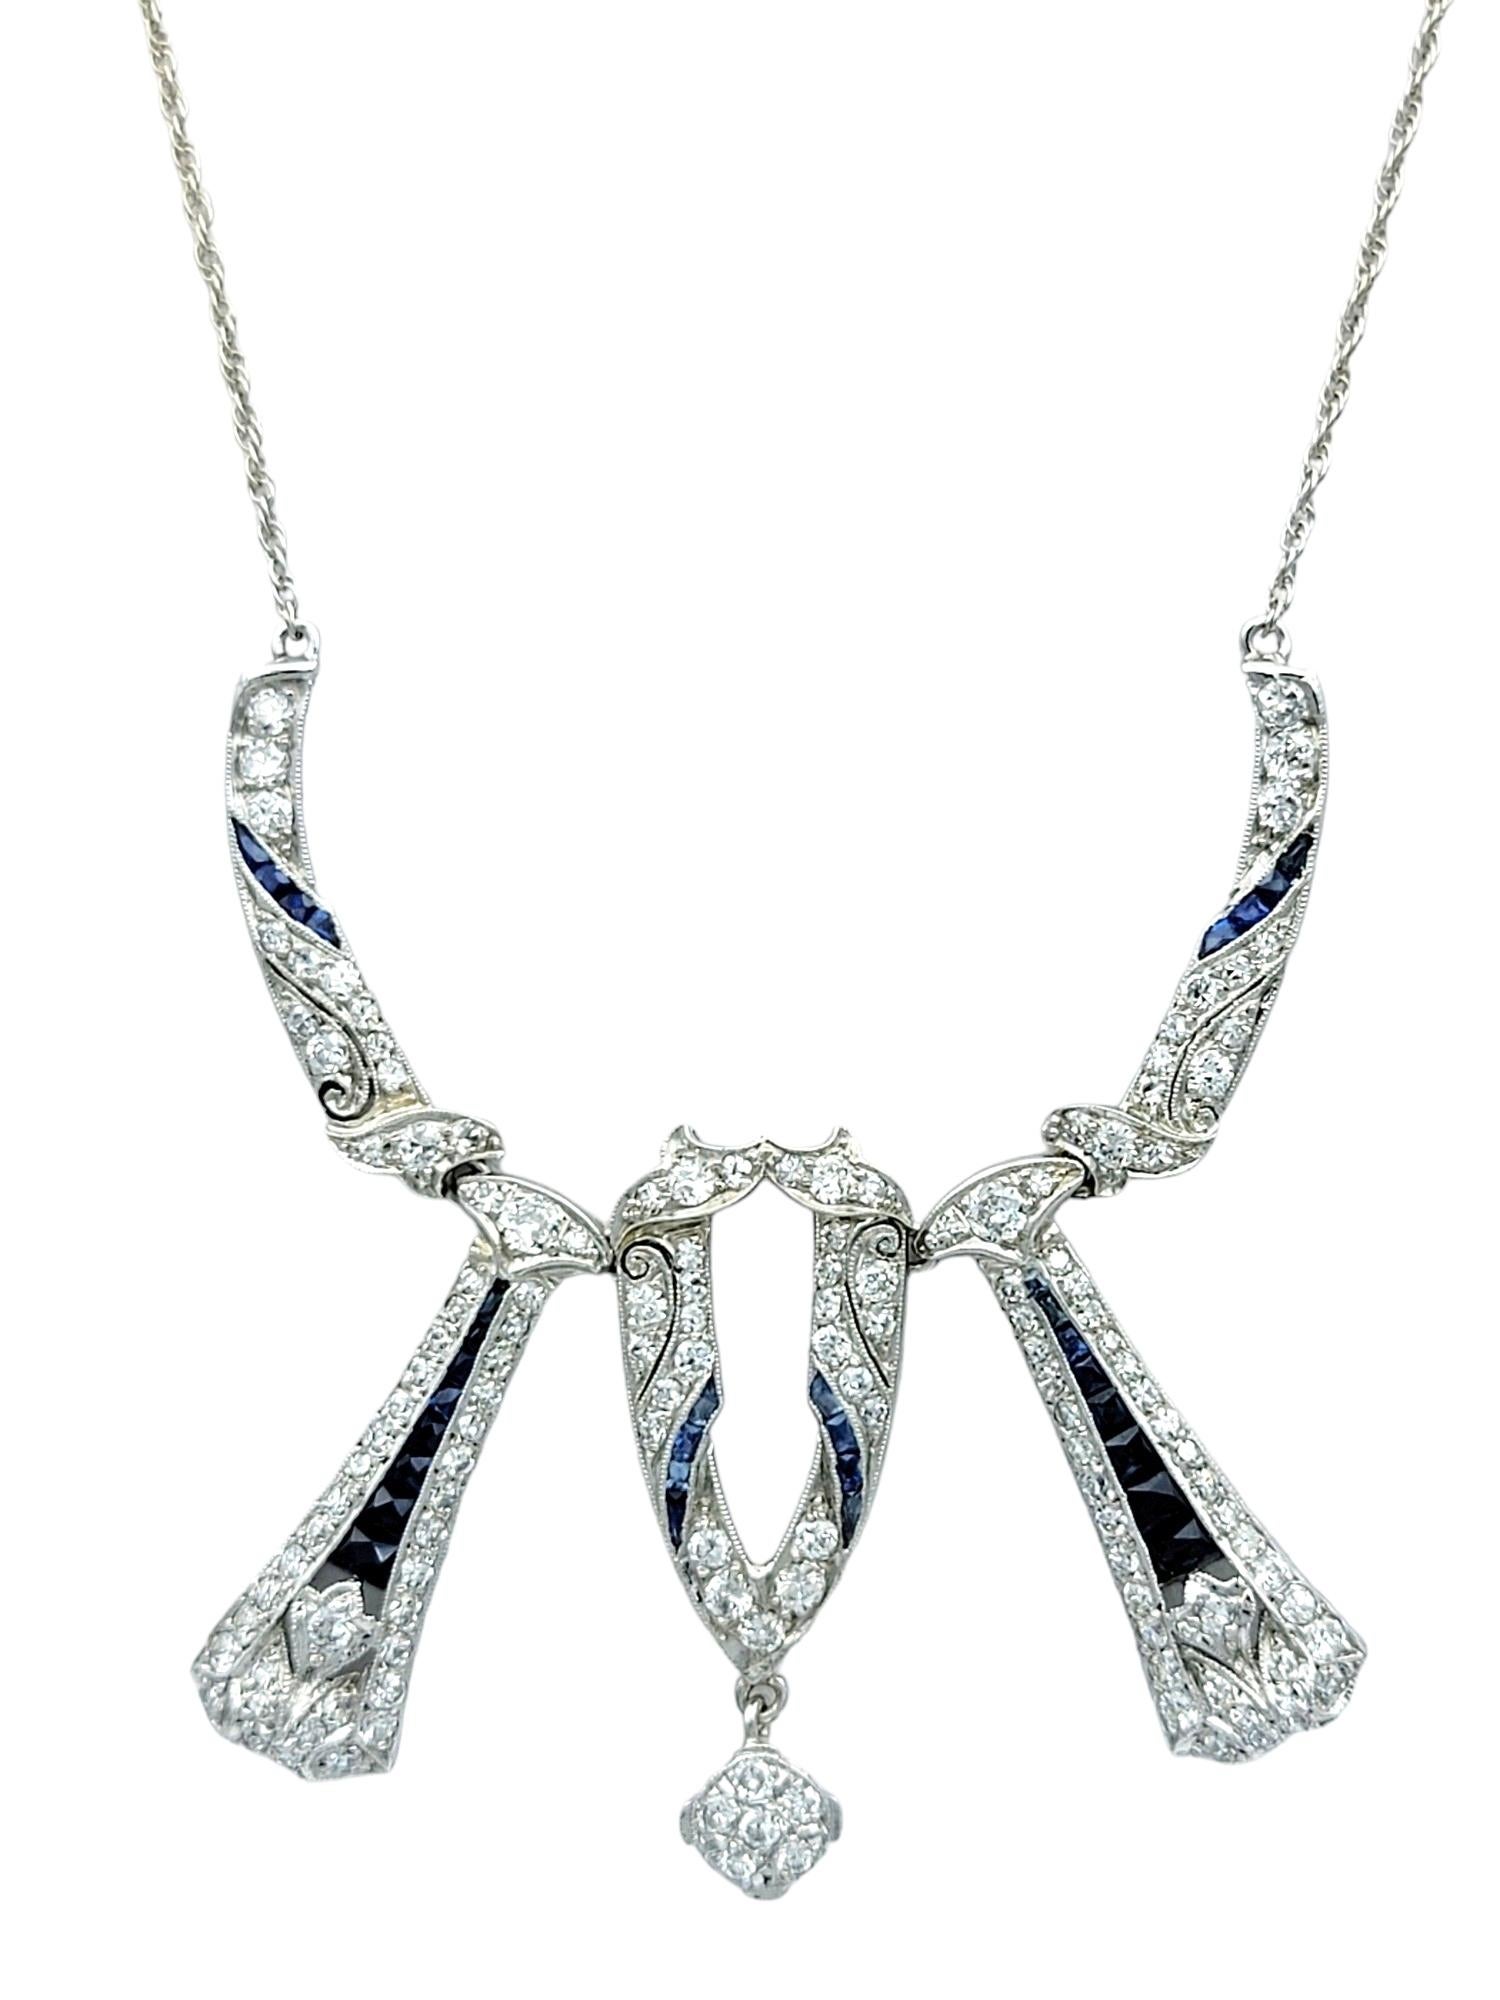 This exquisite necklace features a mesmerizing combination of diamonds and blue sapphires set in 14 karat white gold. The geometric design of the necklace captures the elegance and sophistication of the Art Deco period, with intricate details that